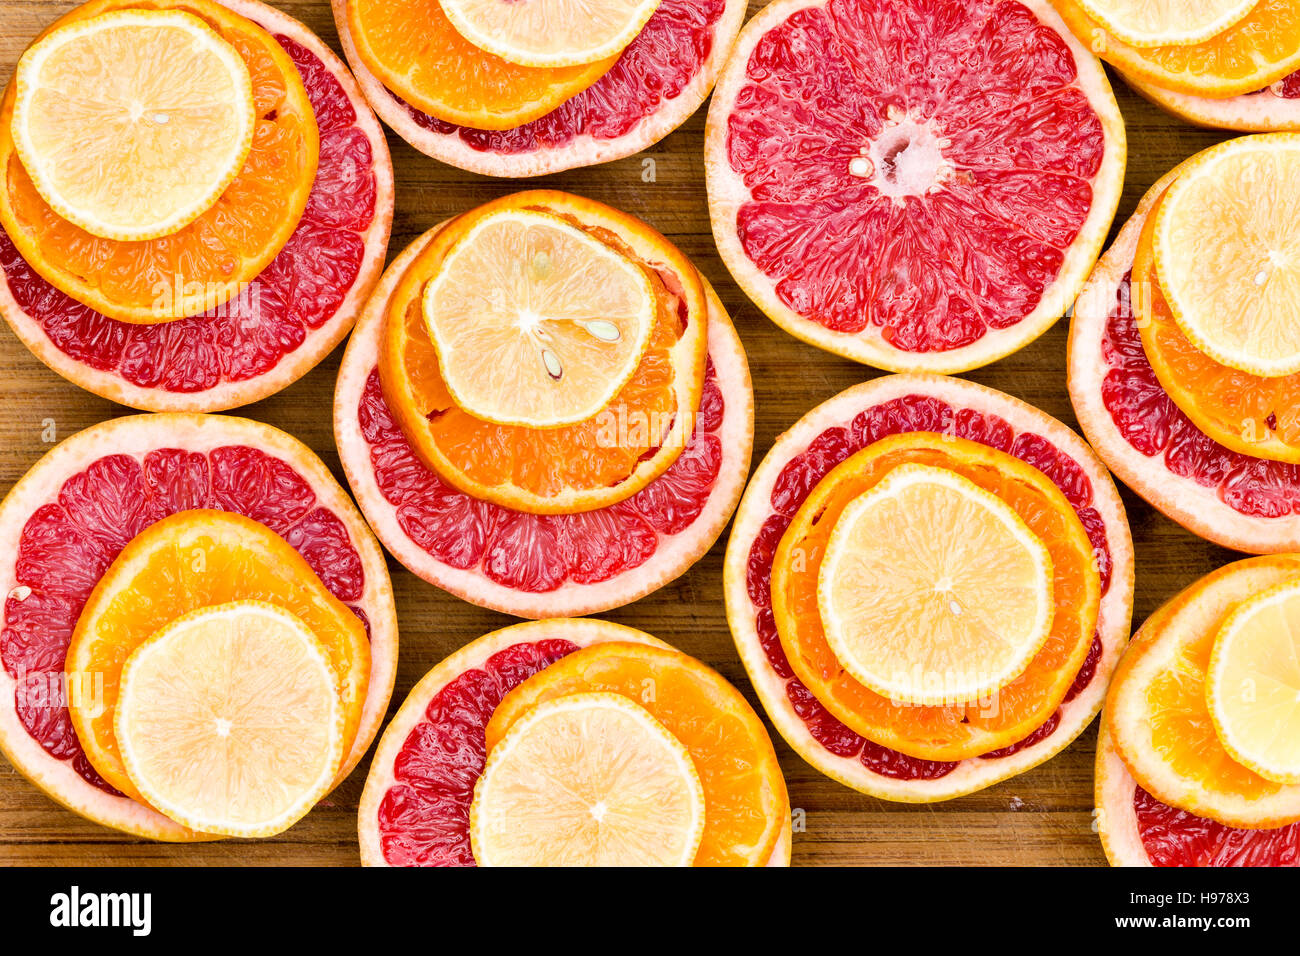 Full Frame, High Angle View of Sliced Ruby Red Grapefruit Stacked with Ripe Orange and Lemon Slices on Rustic Wooden Cutting Board Stock Photo